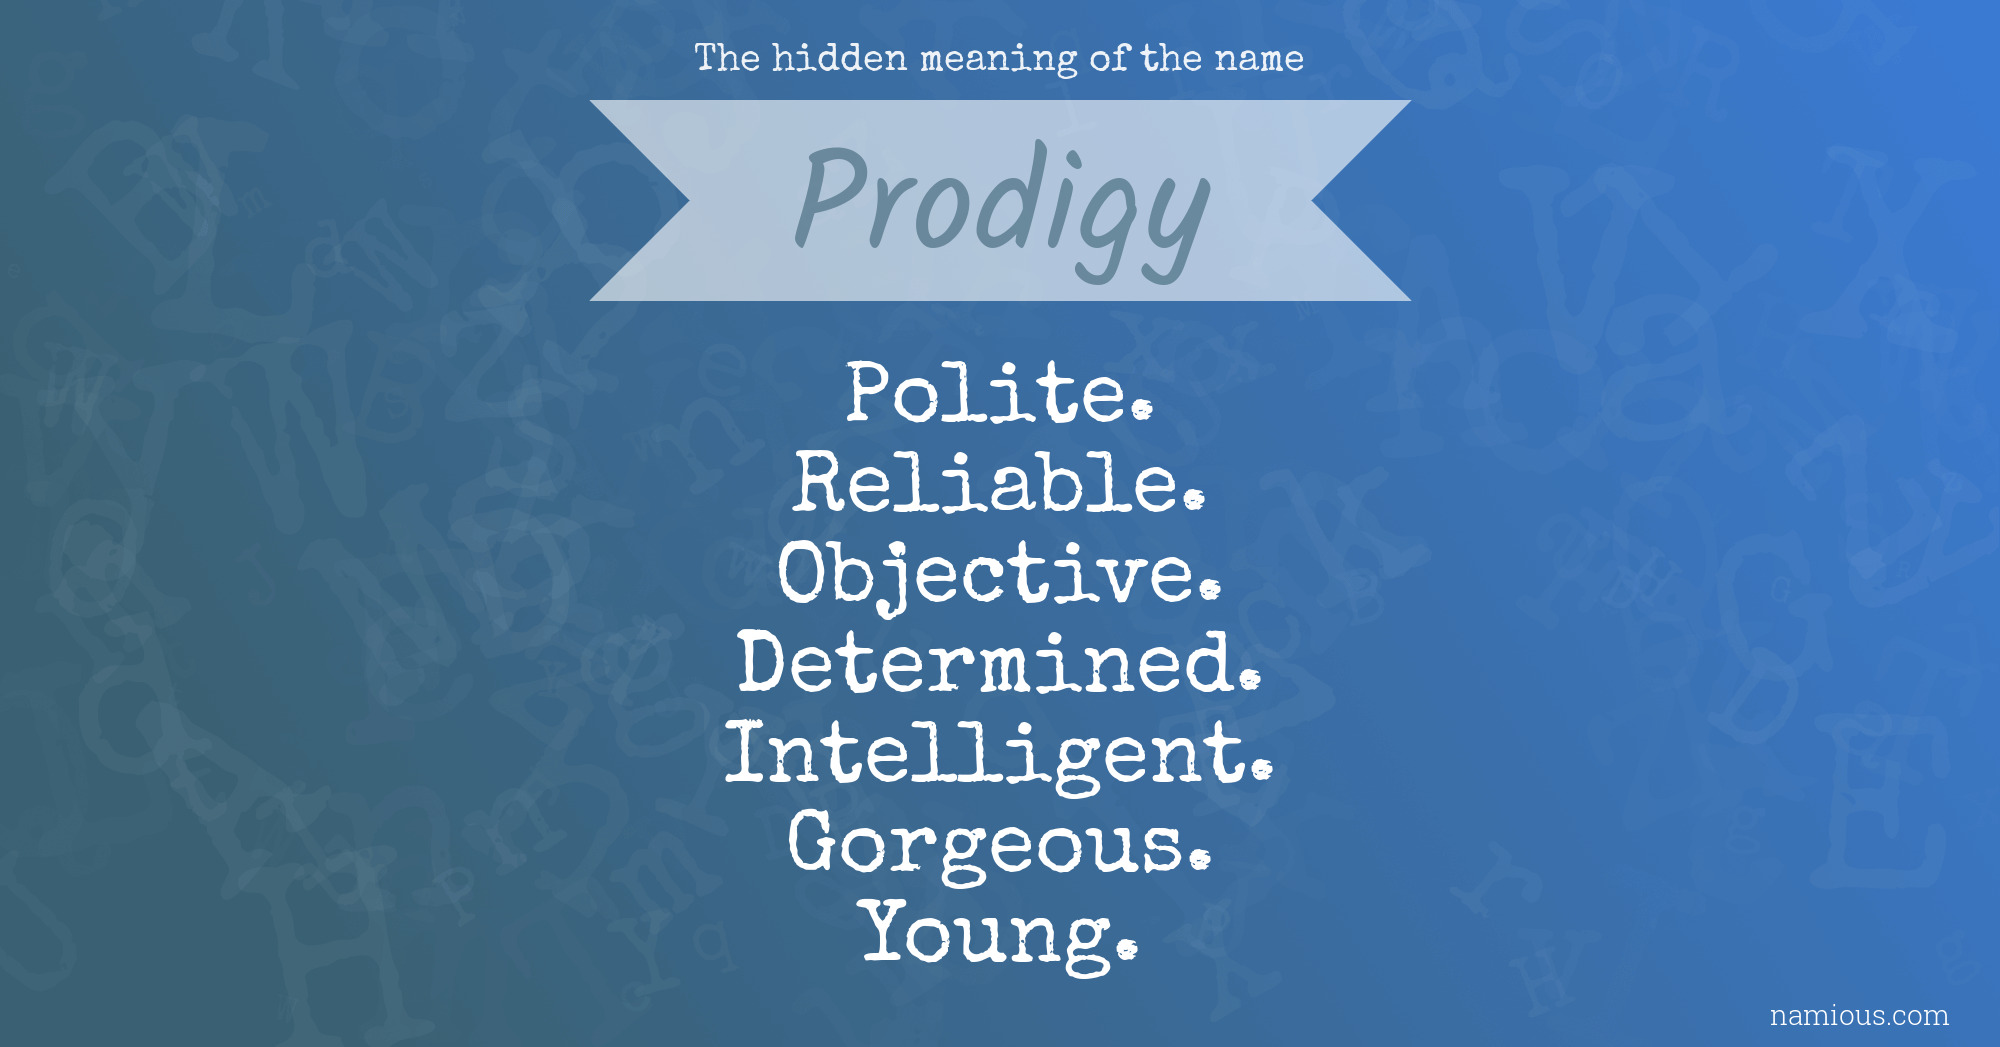 The hidden meaning of the name Prodigy